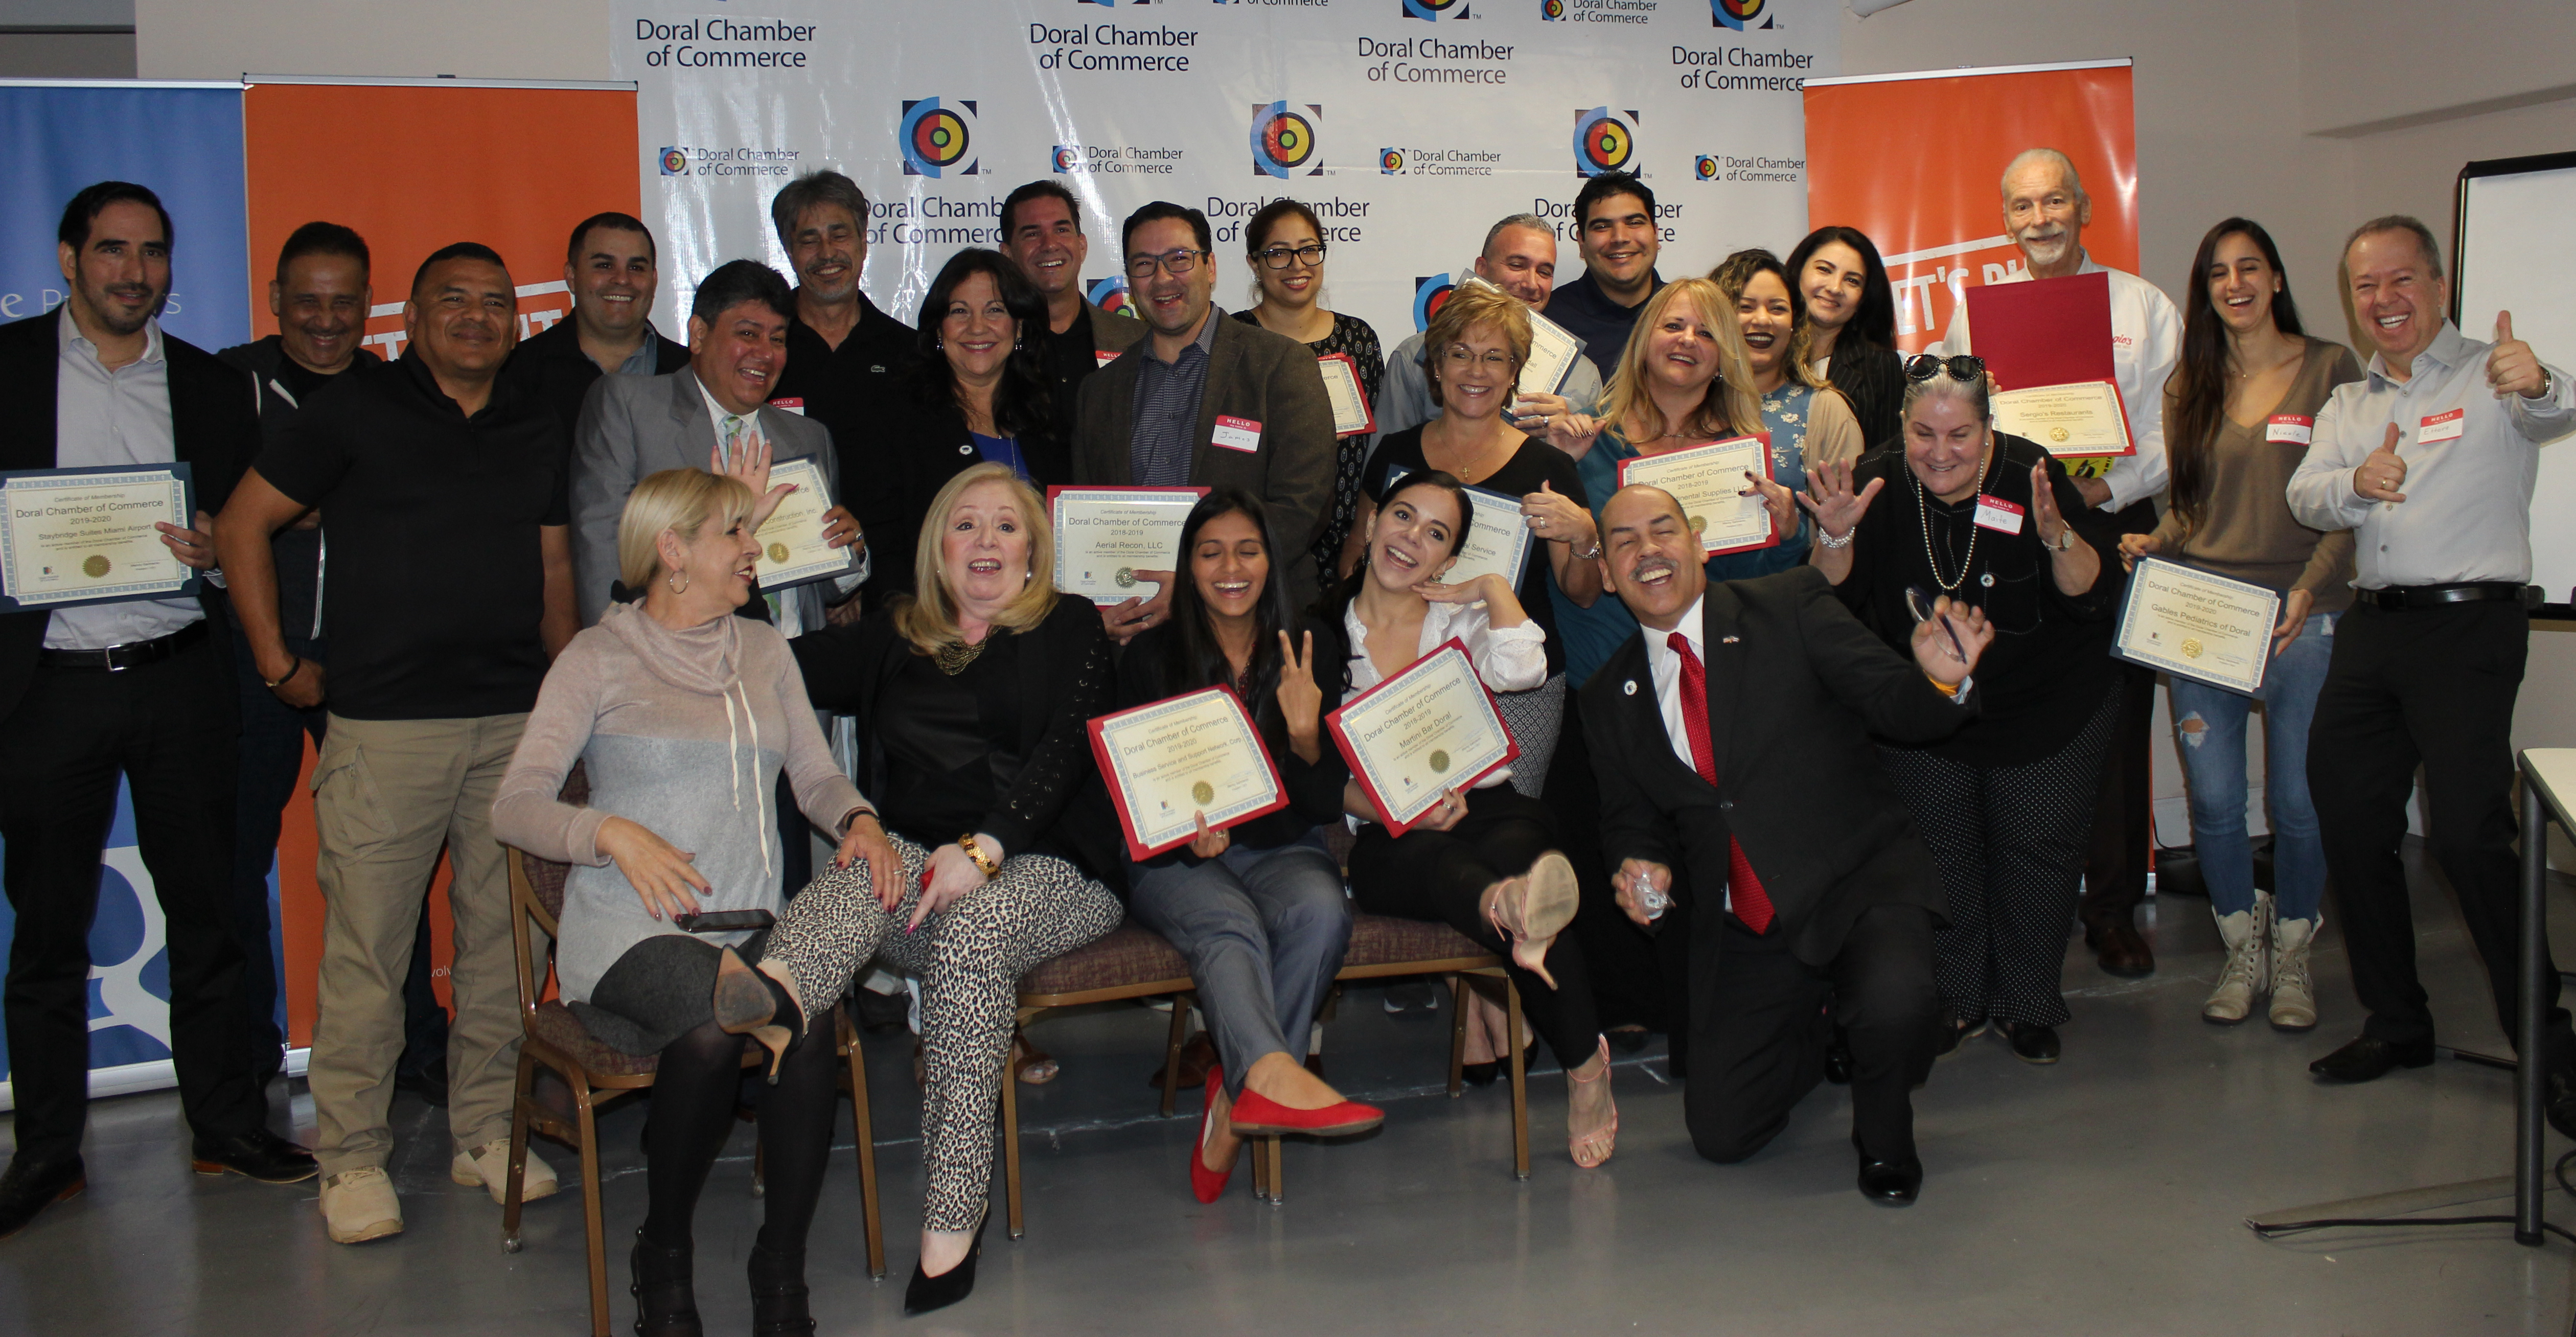 Doral Chamber of Commerce introduces Circle of Success event, group photo with new members of the DCC.